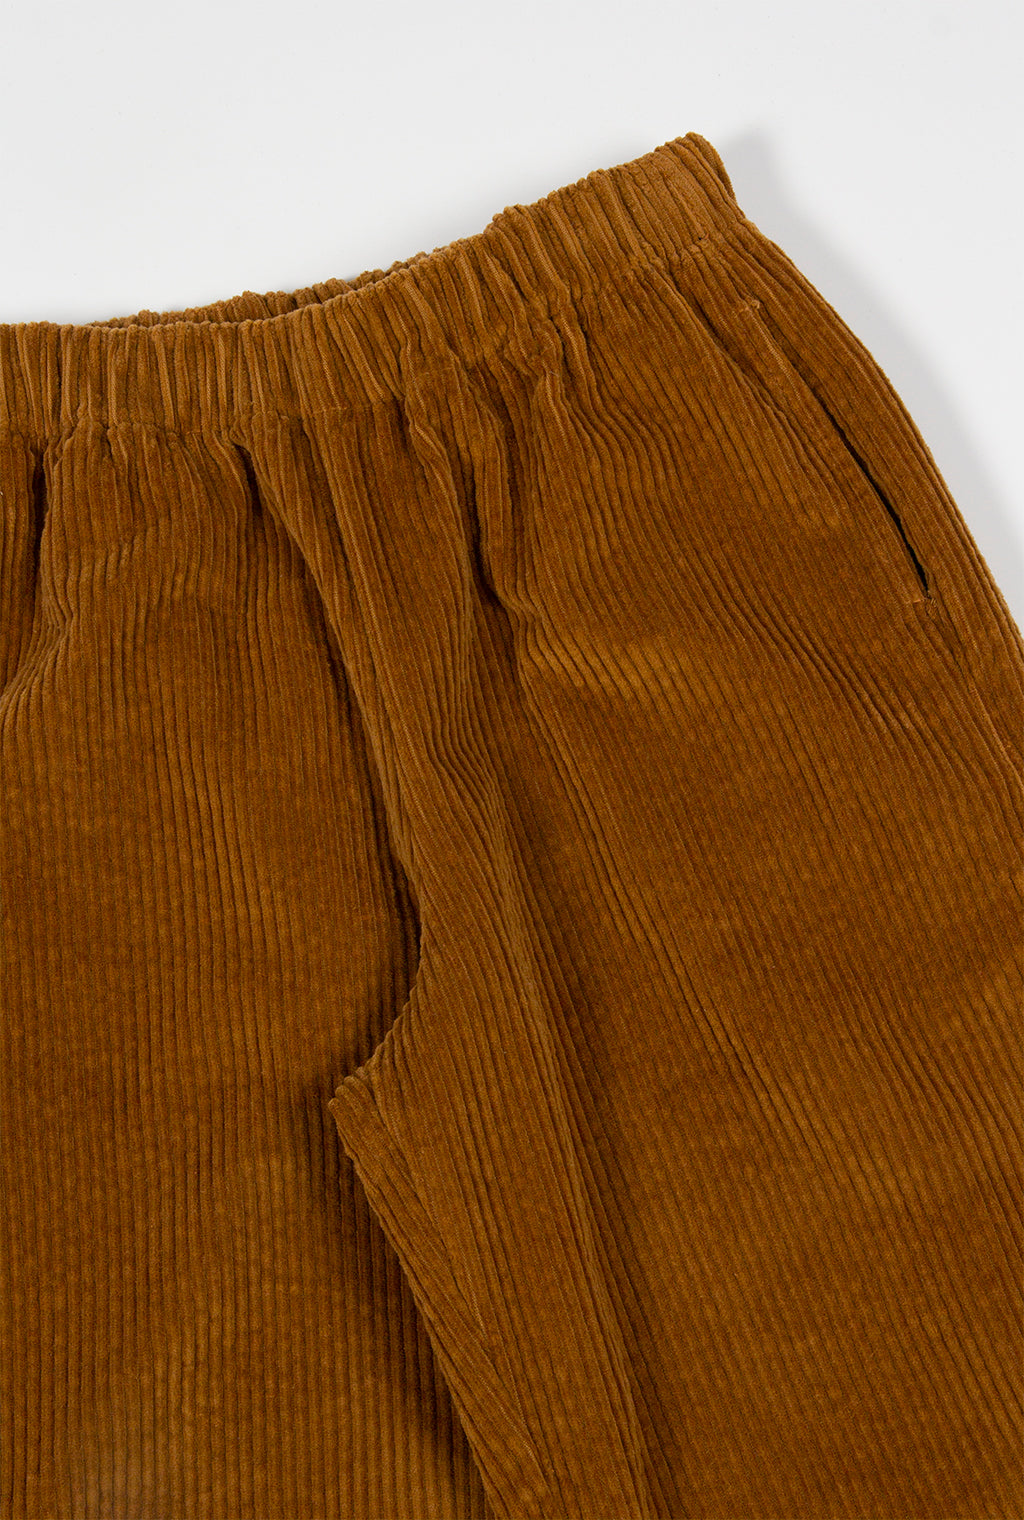 Relaxed Fit Corduroy Trousers / Pre-order